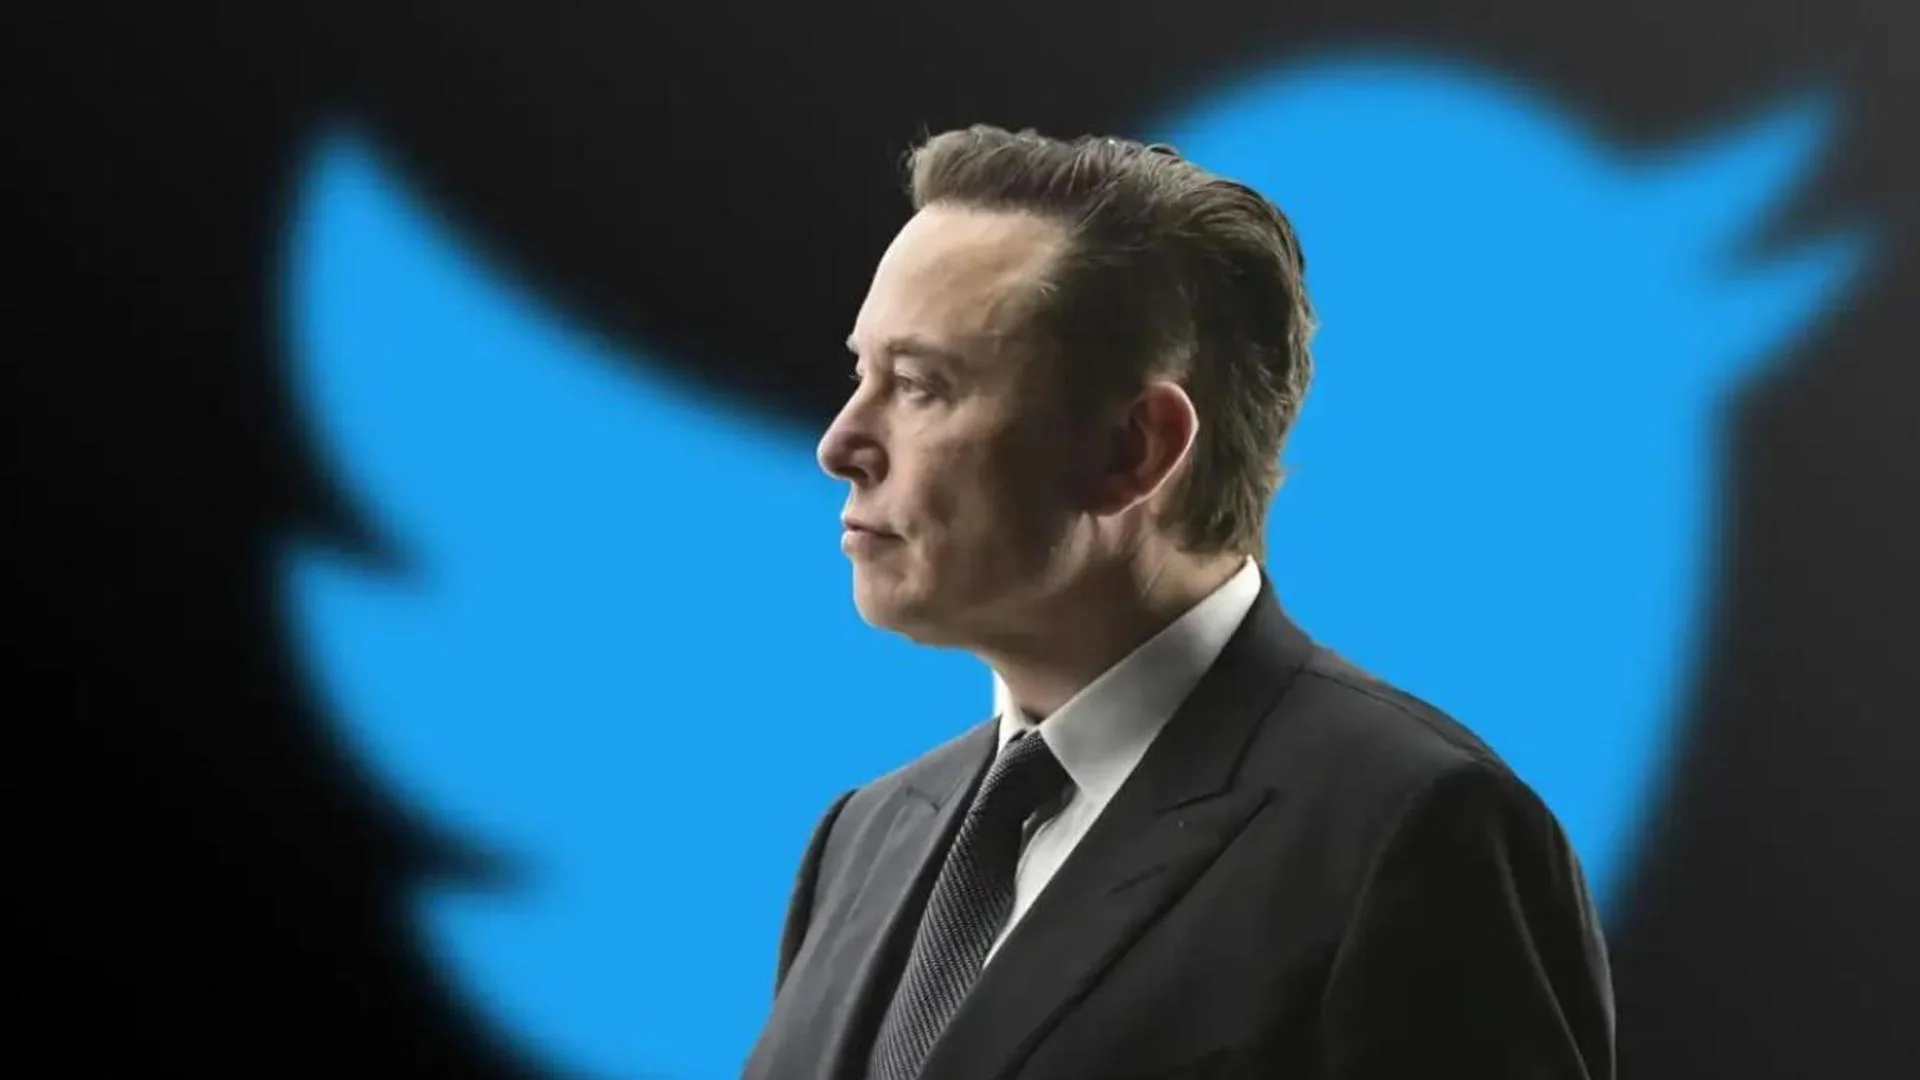 Elon Musk to step down as CEO of Twitter